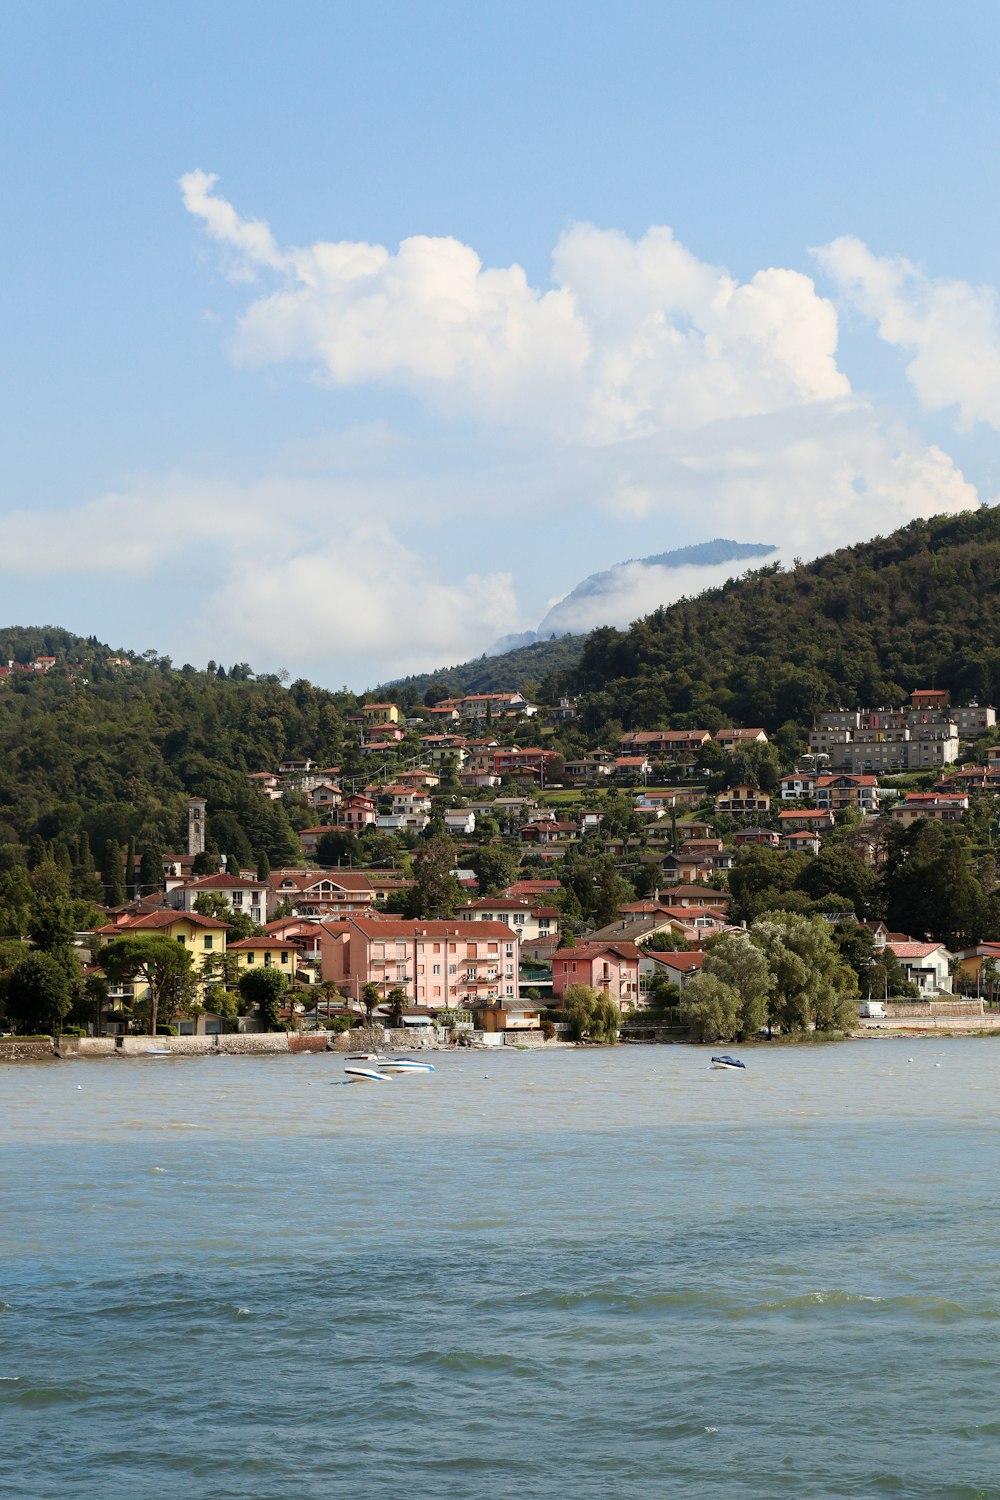 houses on mountain near body of water during daytime